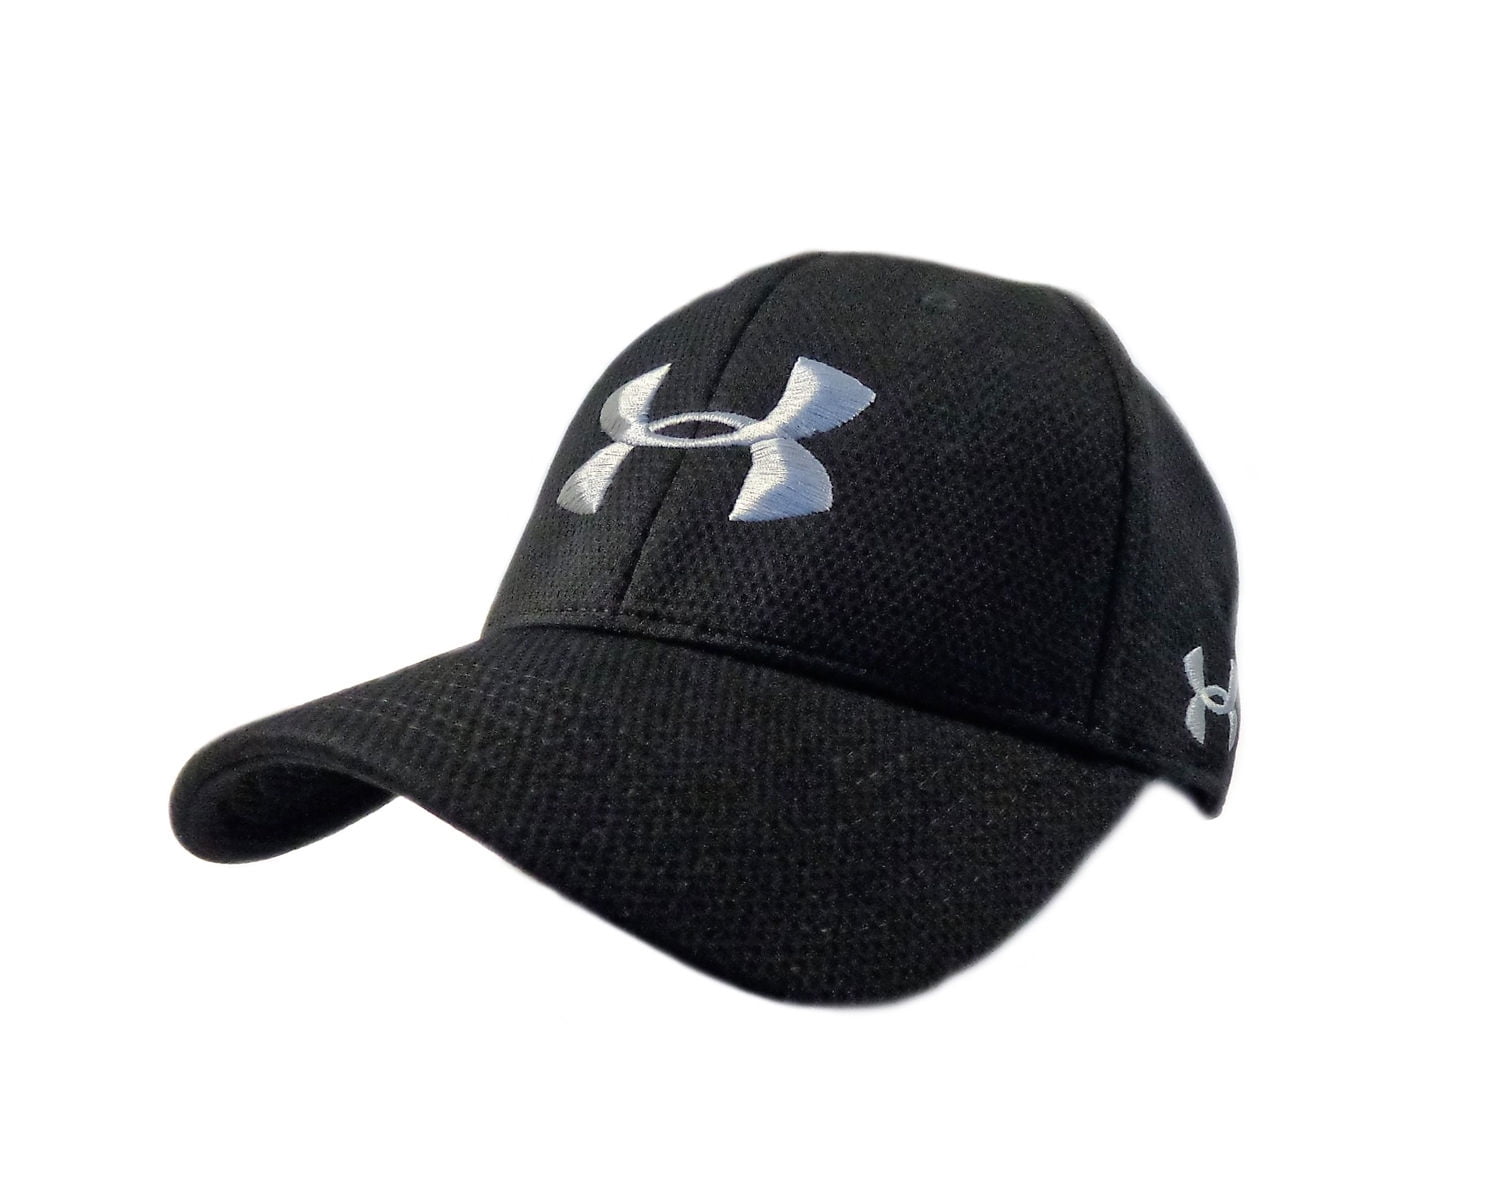 black fitted under armour hat